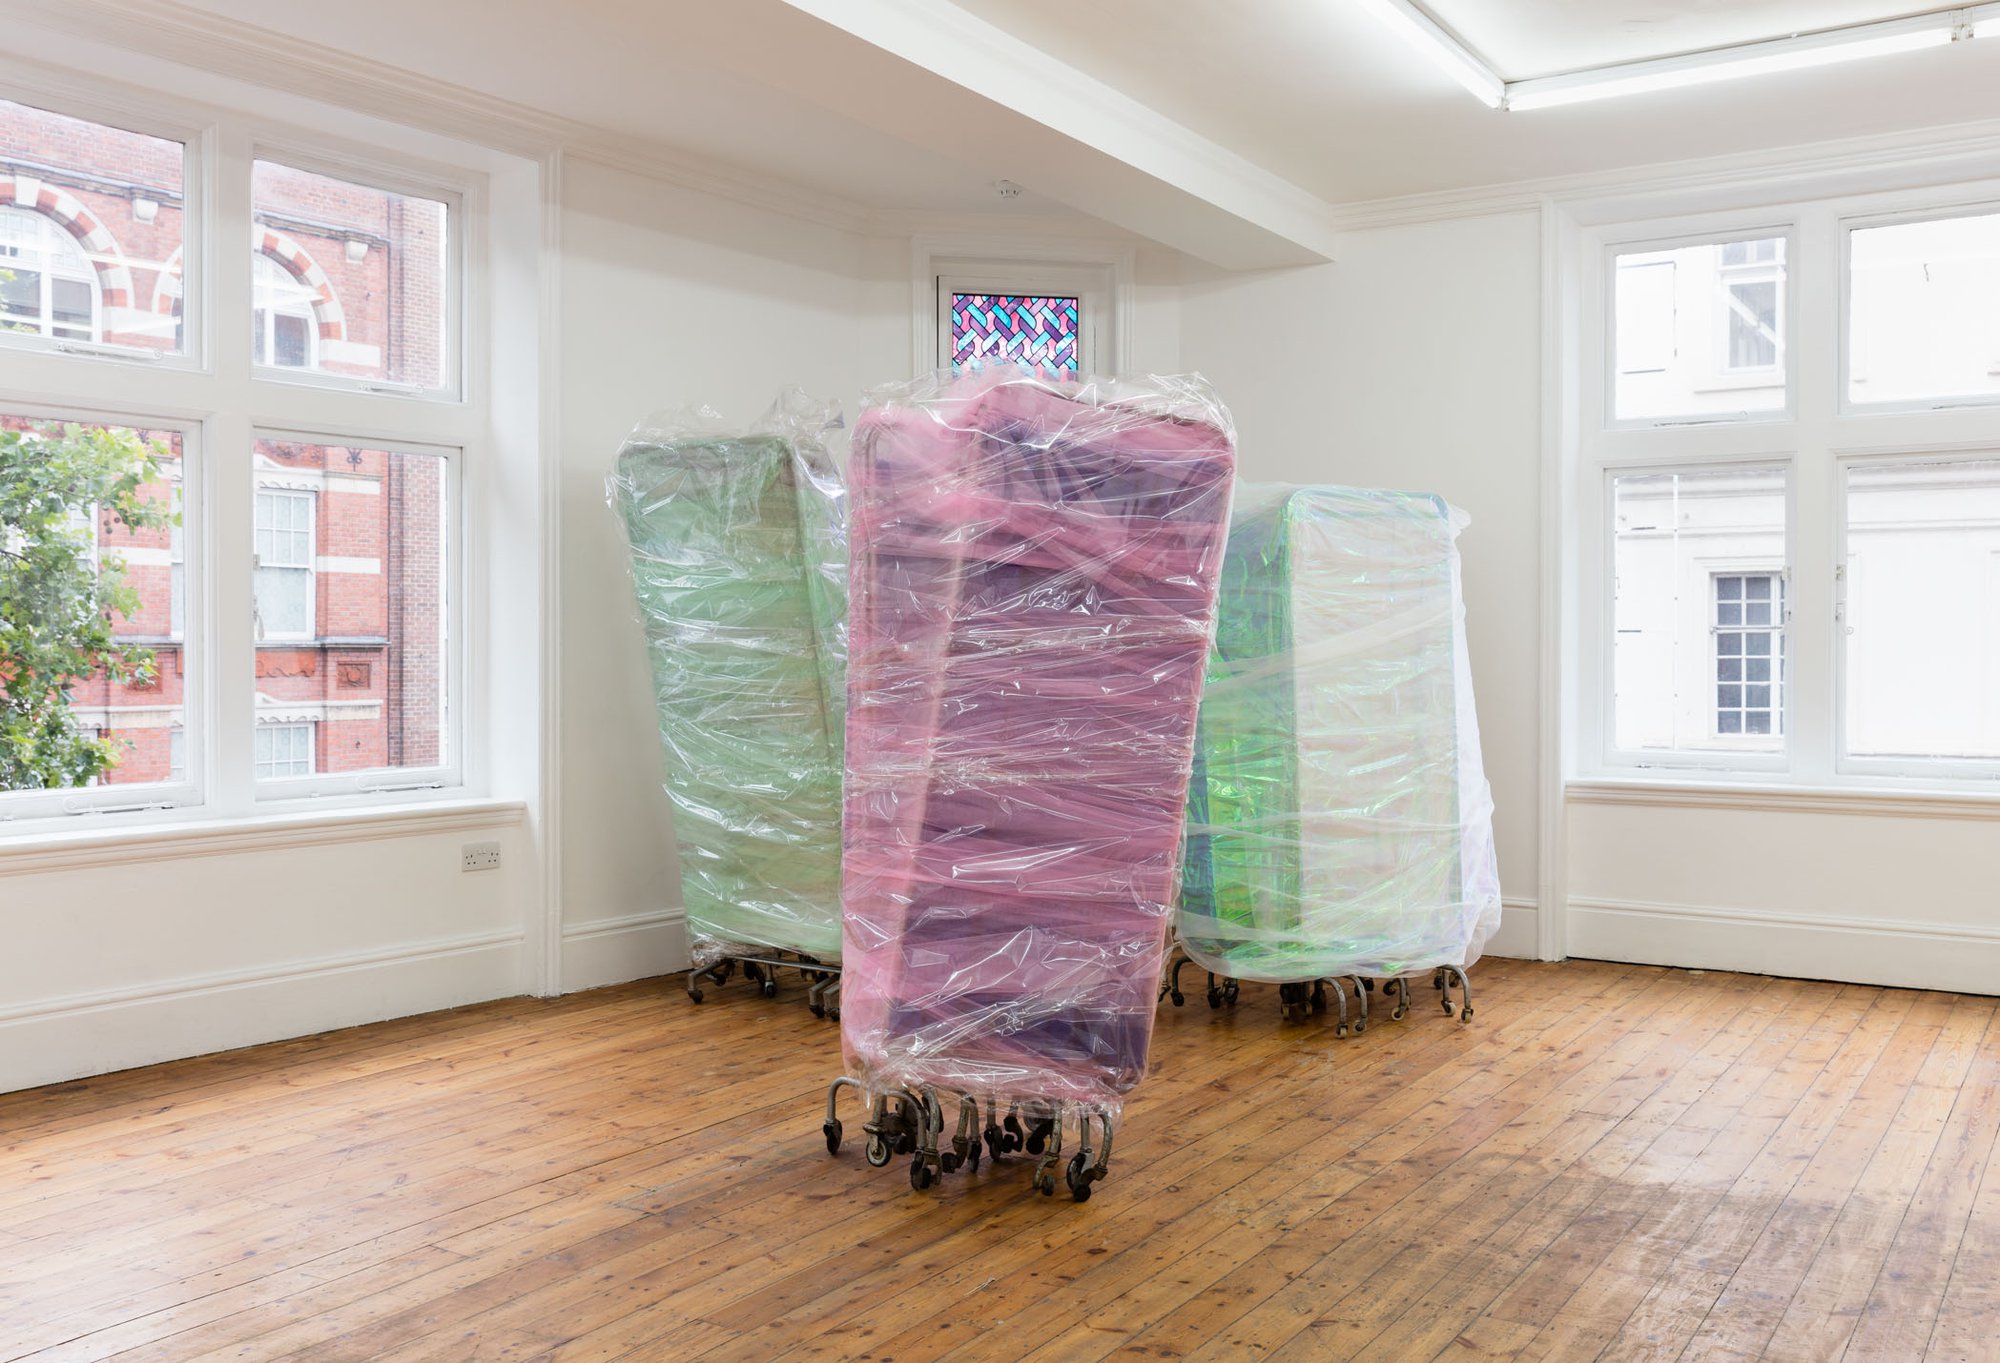 Ian Law, There was a body, I was there, was a body, medical privacy screens with soft toy fur fabric, curtain netting and organza, gift wrapped, 172 x 86 x 47 cm (67 3/4 x 33 7/8 x 18 1/2 in), 2016